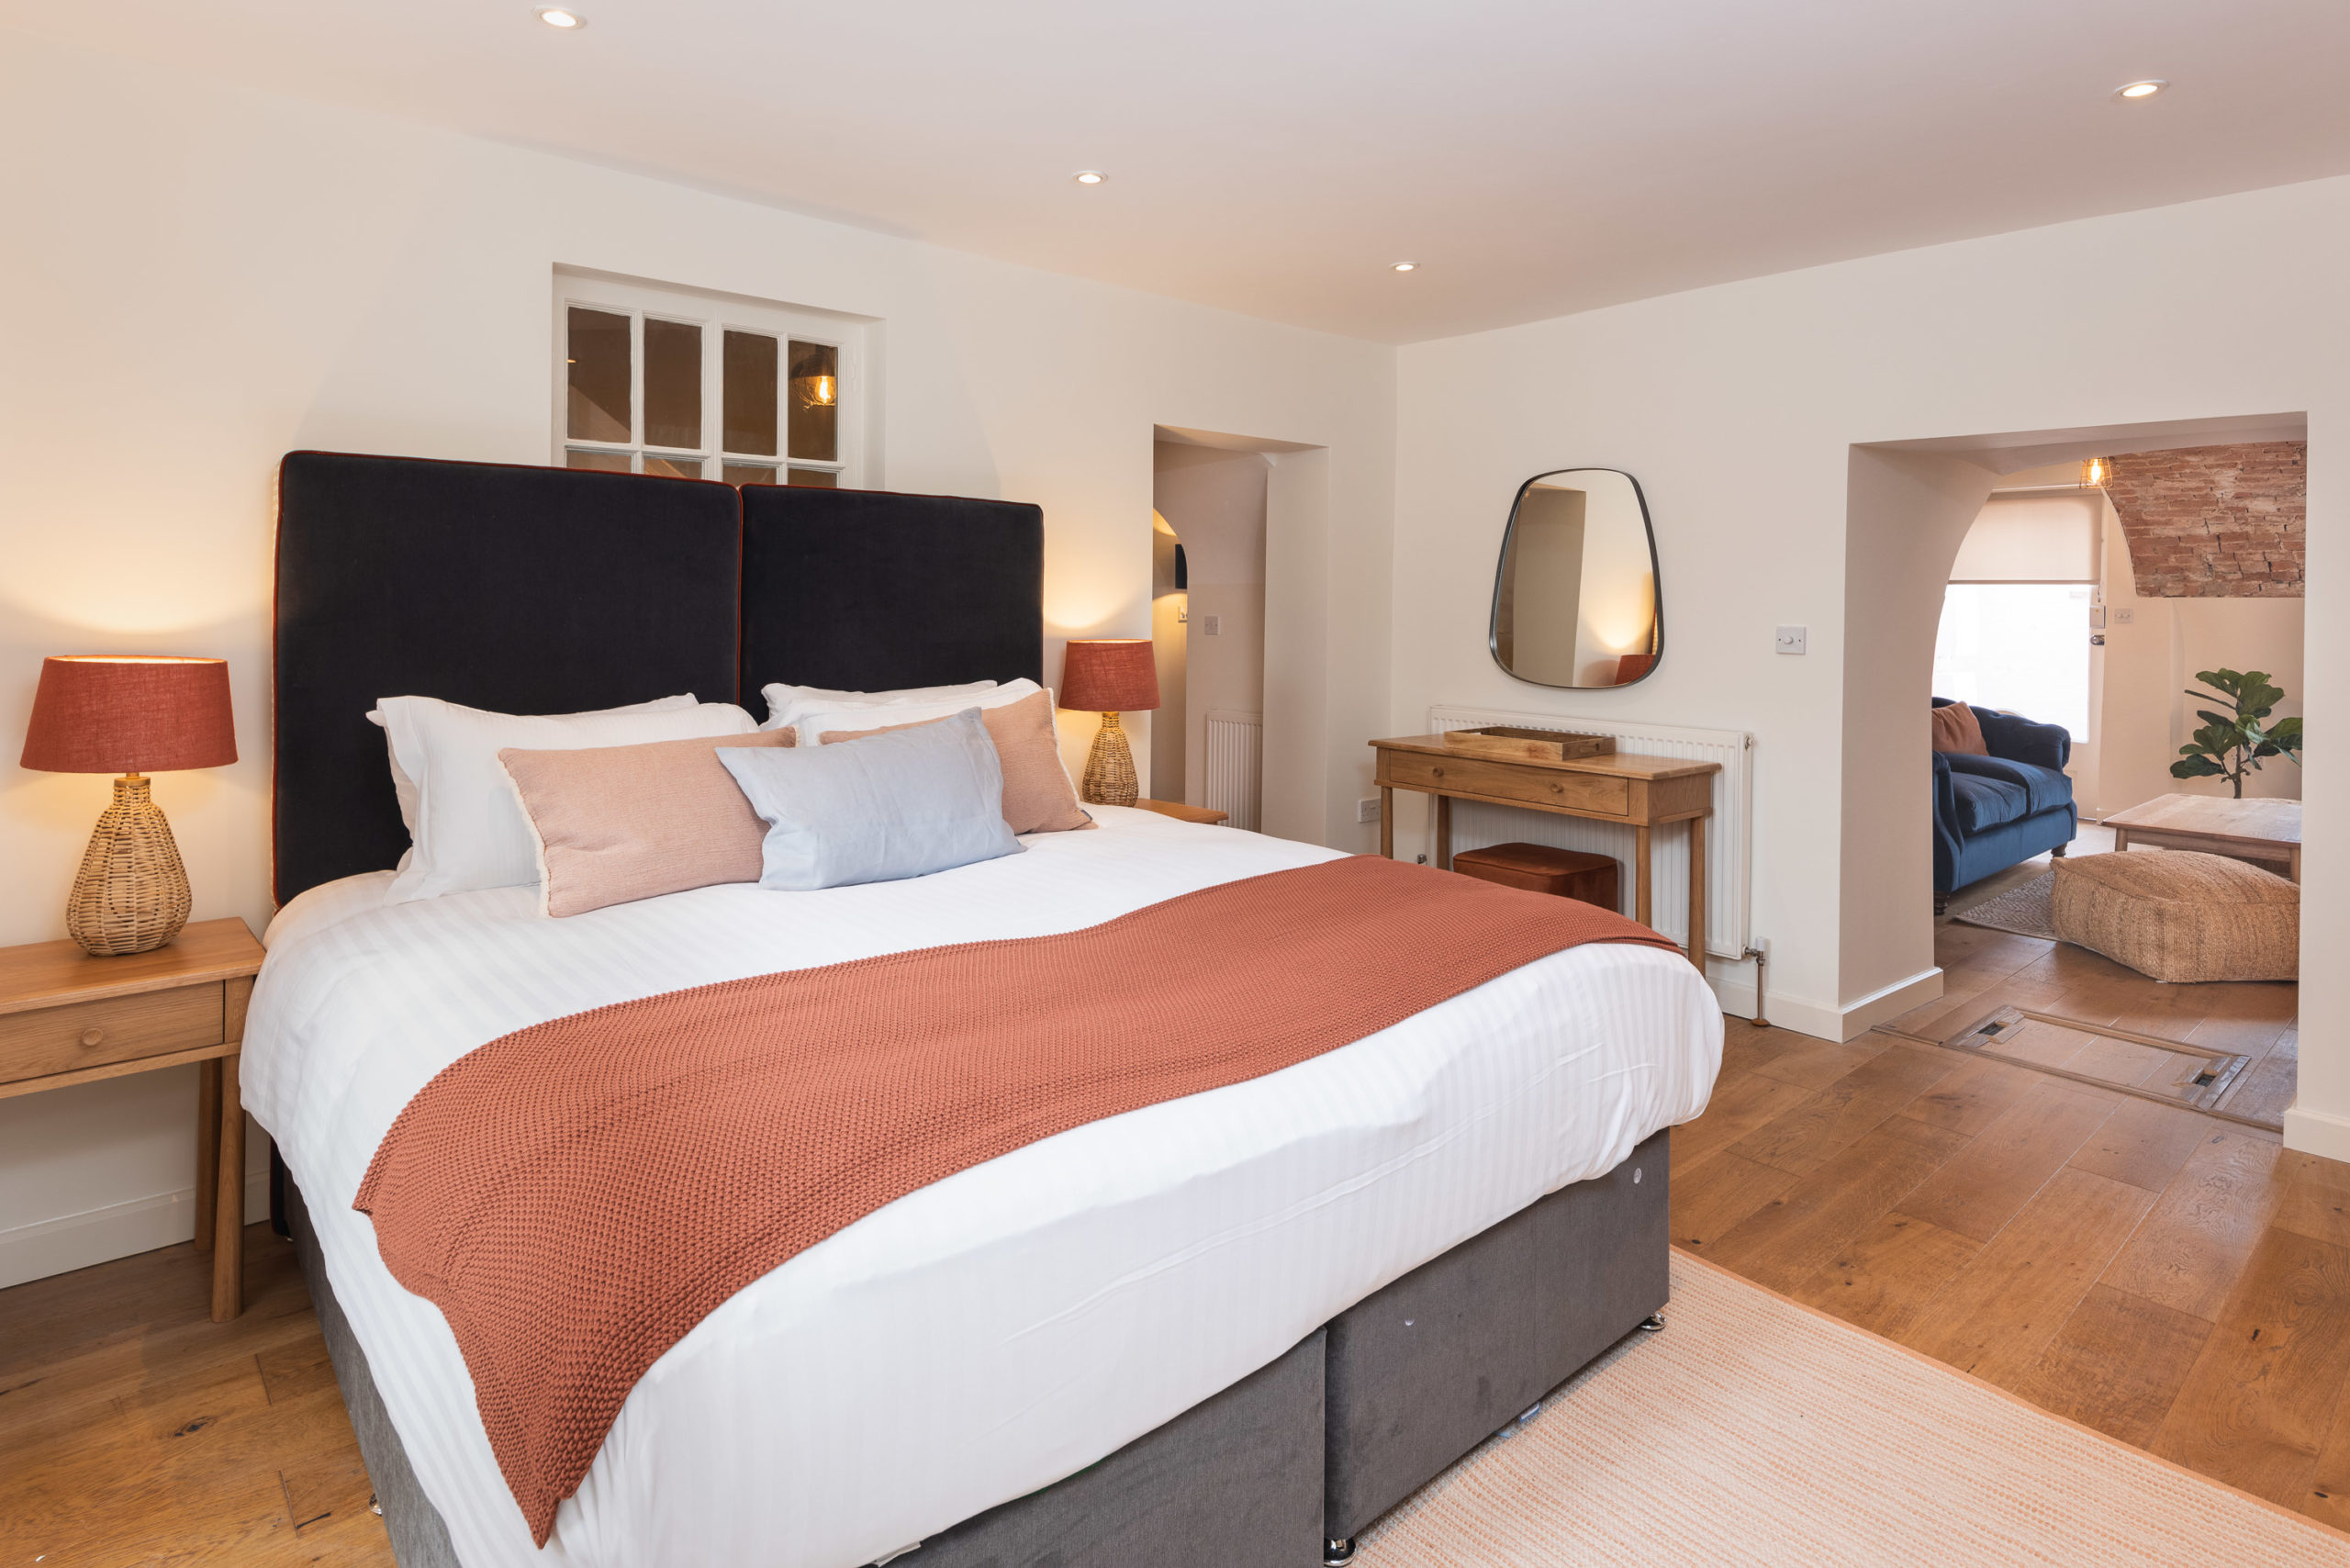 9 Redcliffe Parade W - Serviced Apartments in Bristol City Centre